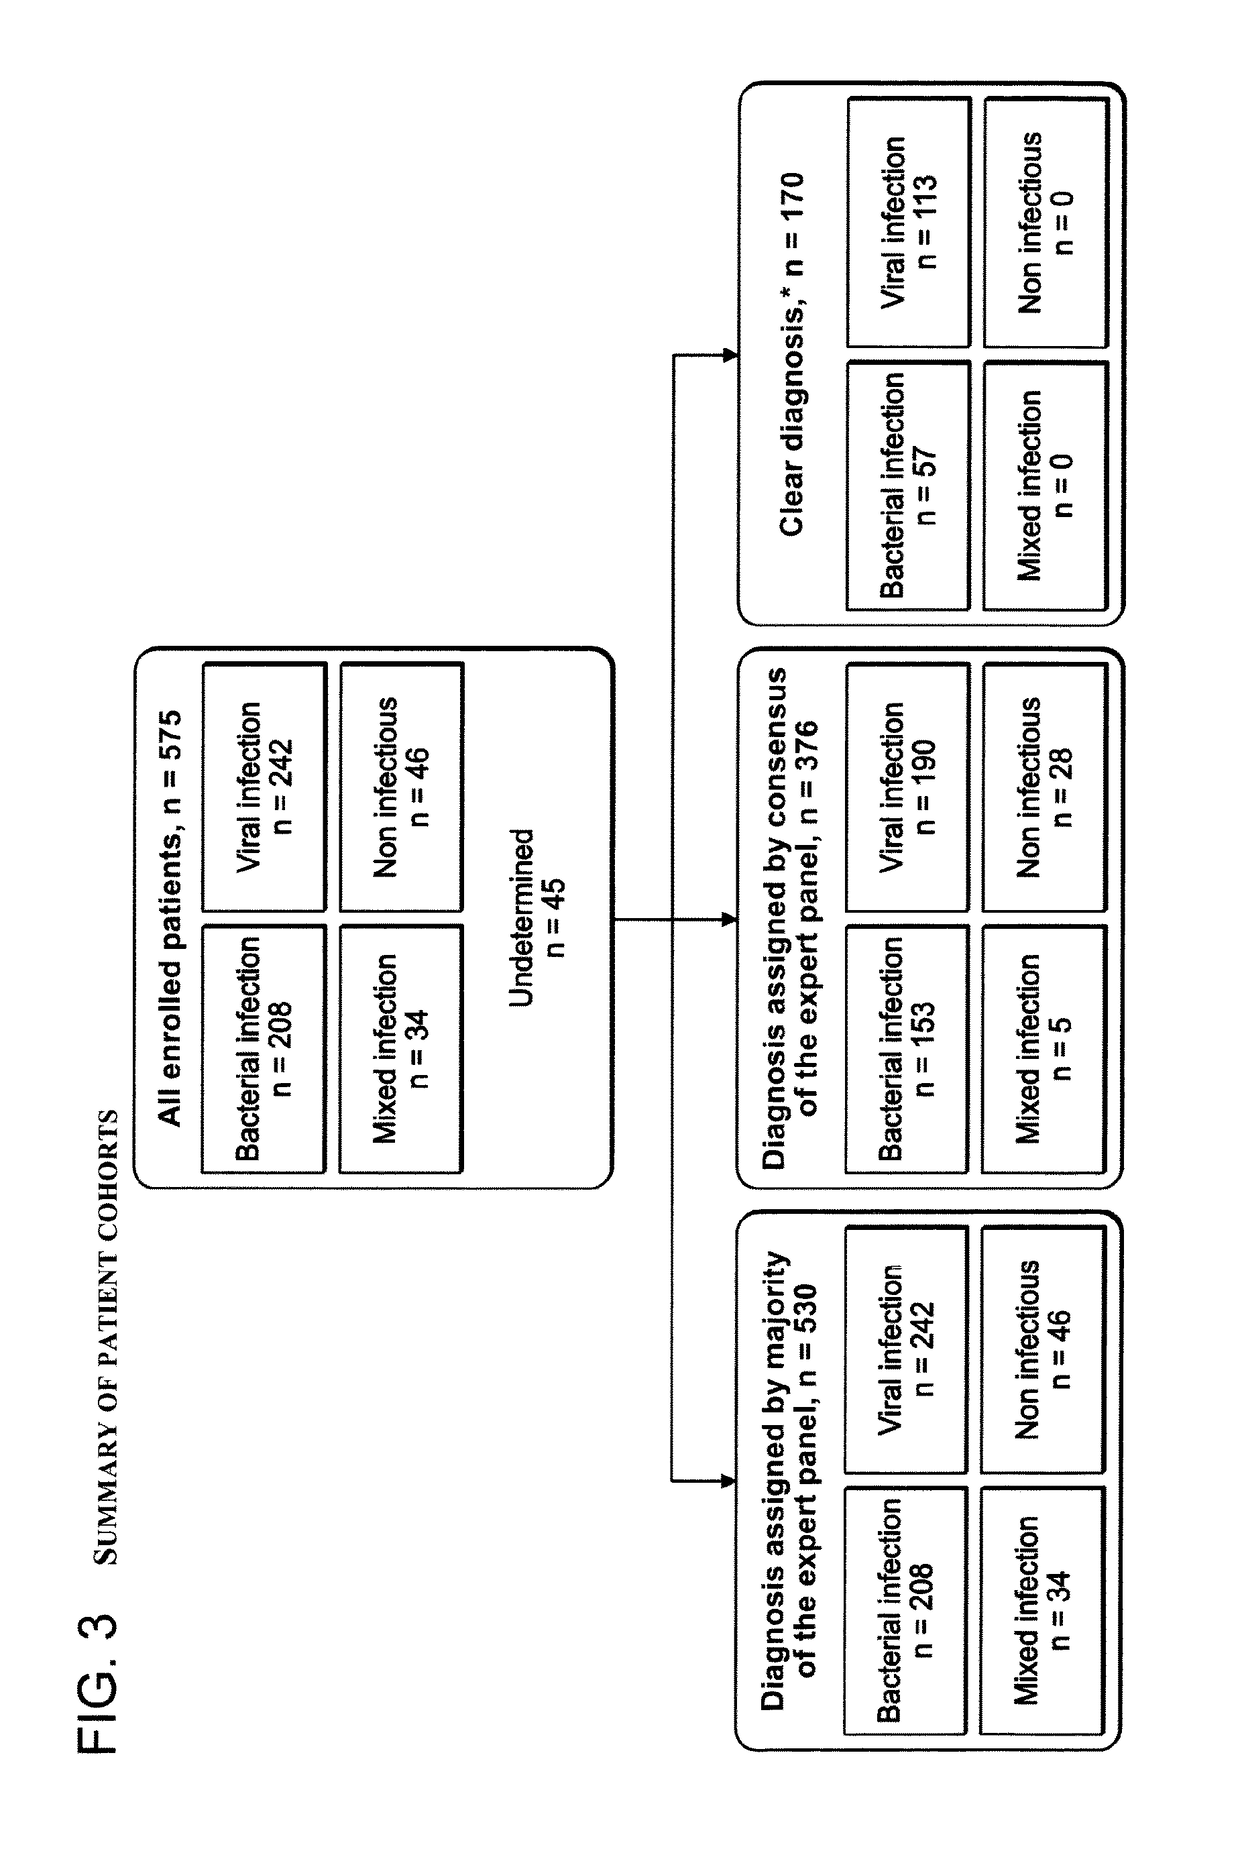 Signatures and determinants for diagnosing infections and methods of use thereof